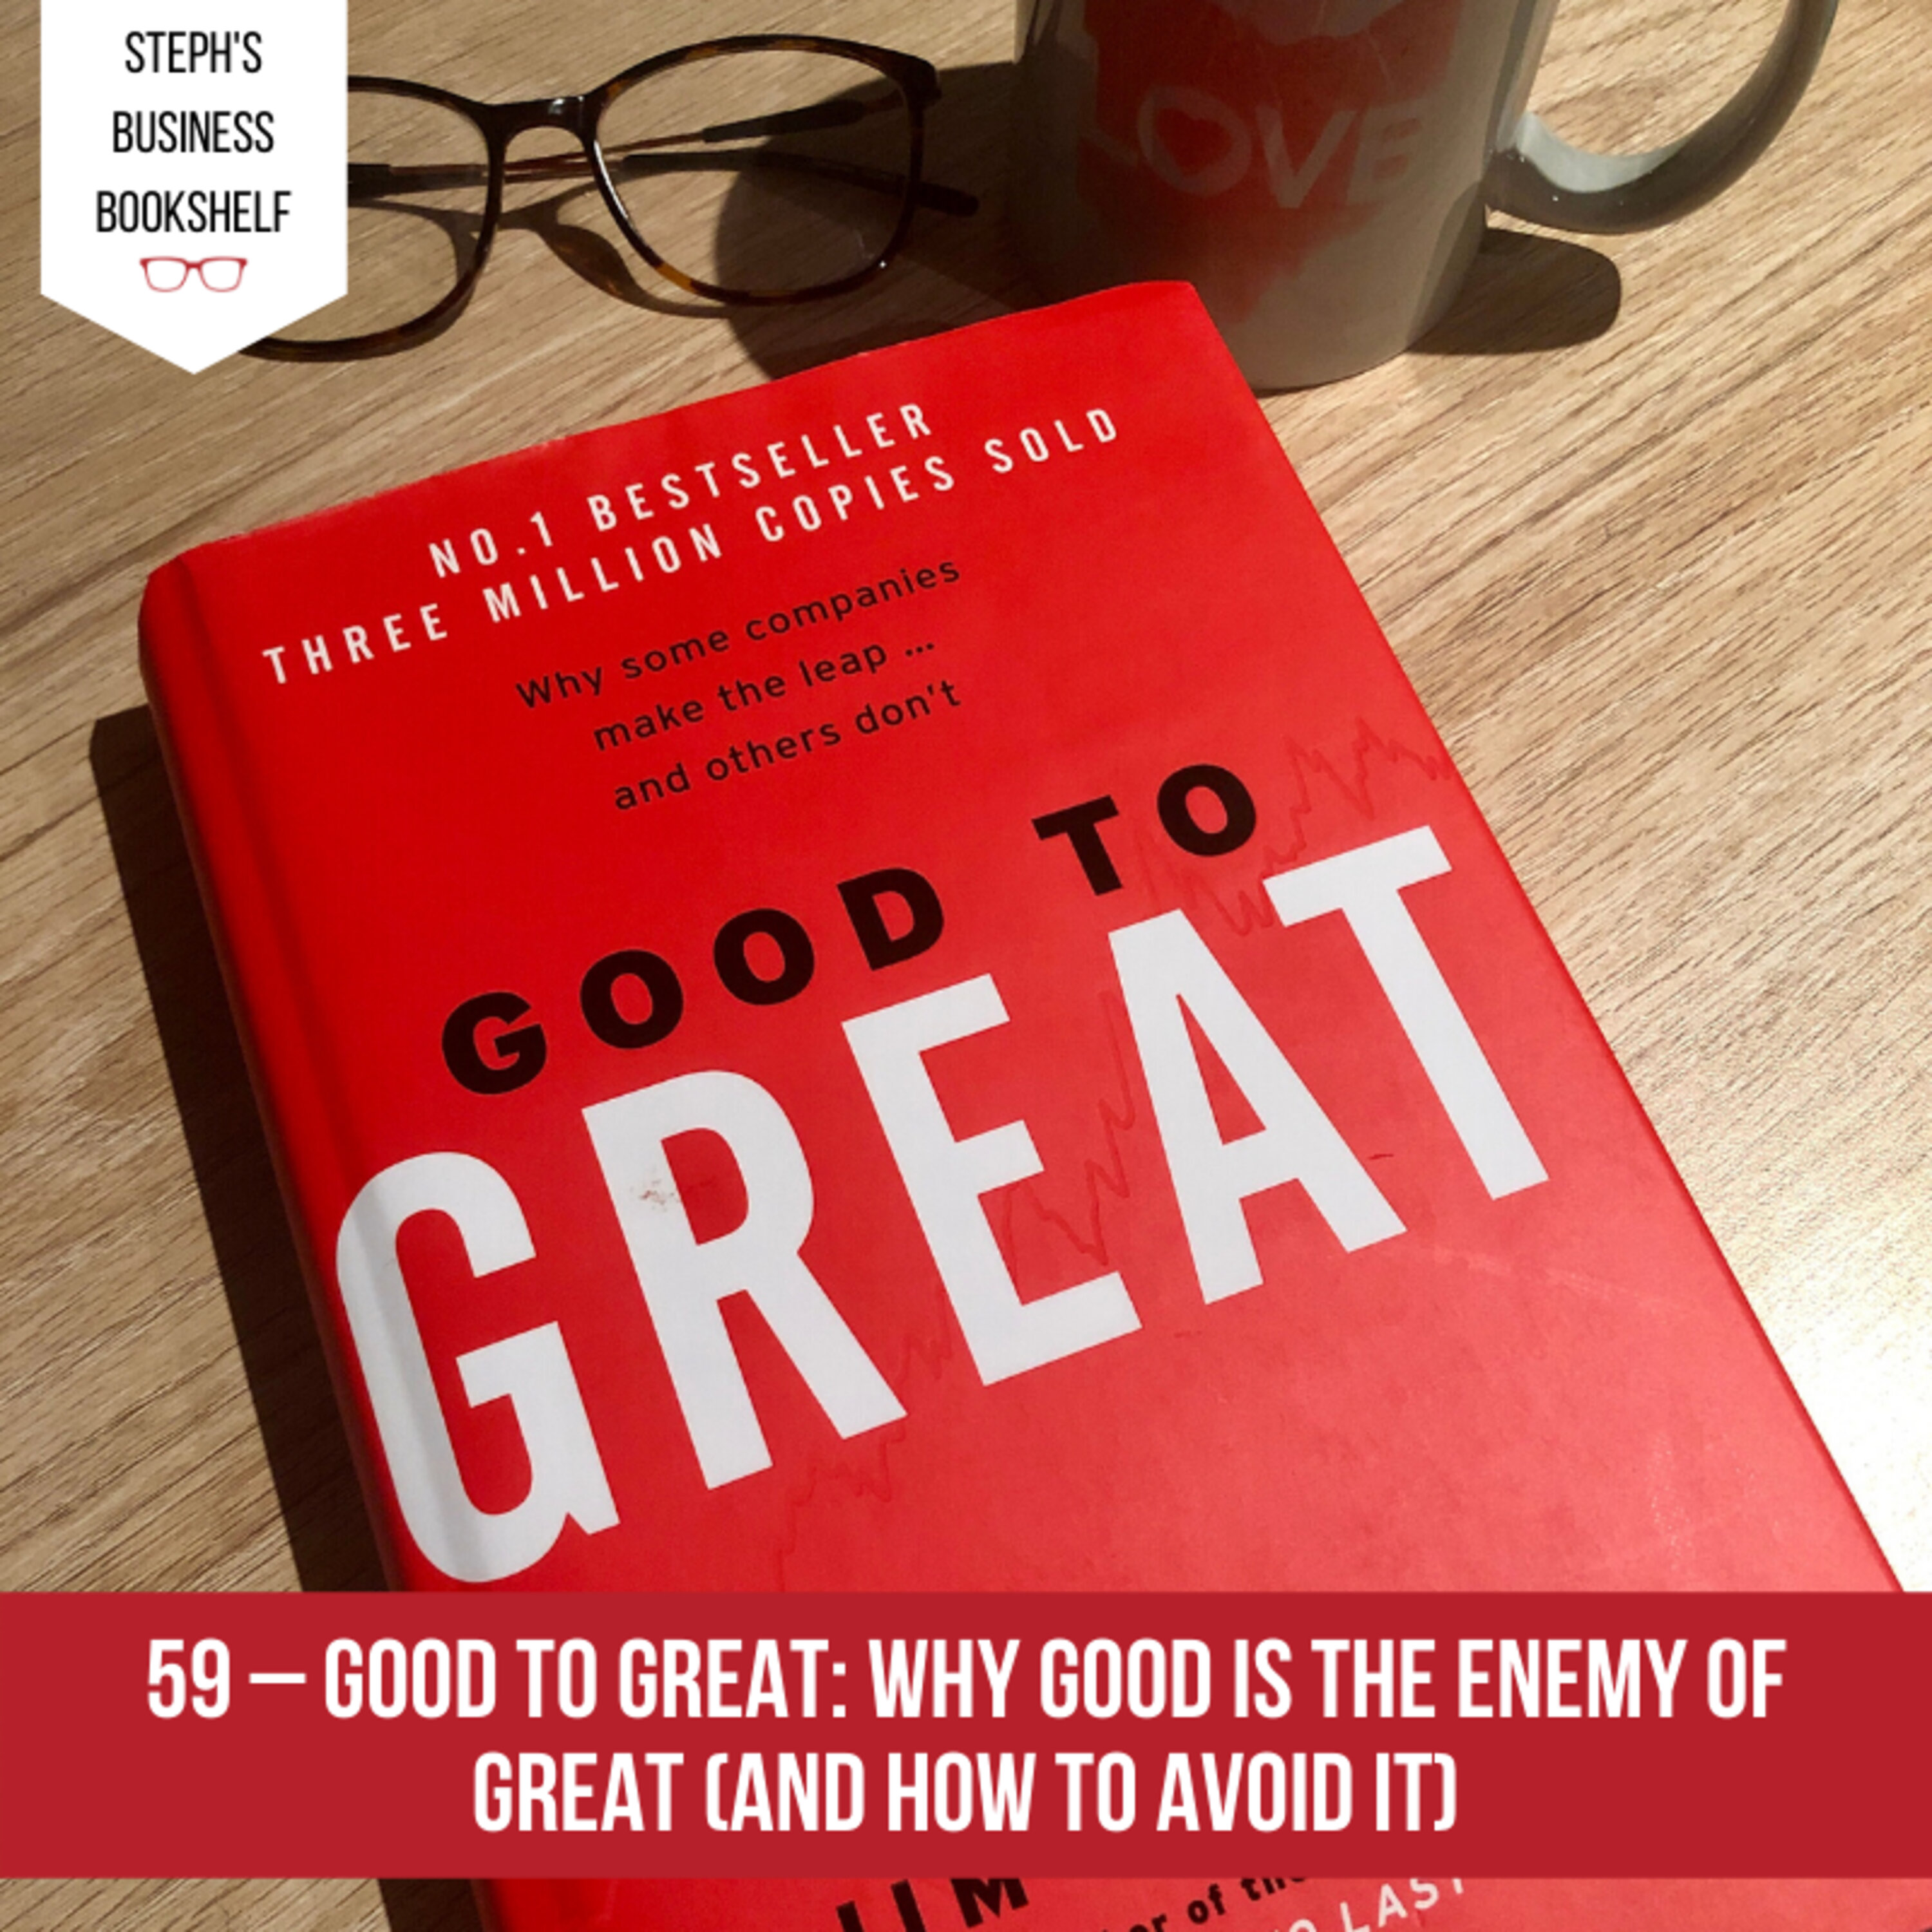 Good to Great by Jim Collins: Why good is the enemy of great (and how to avoid it)